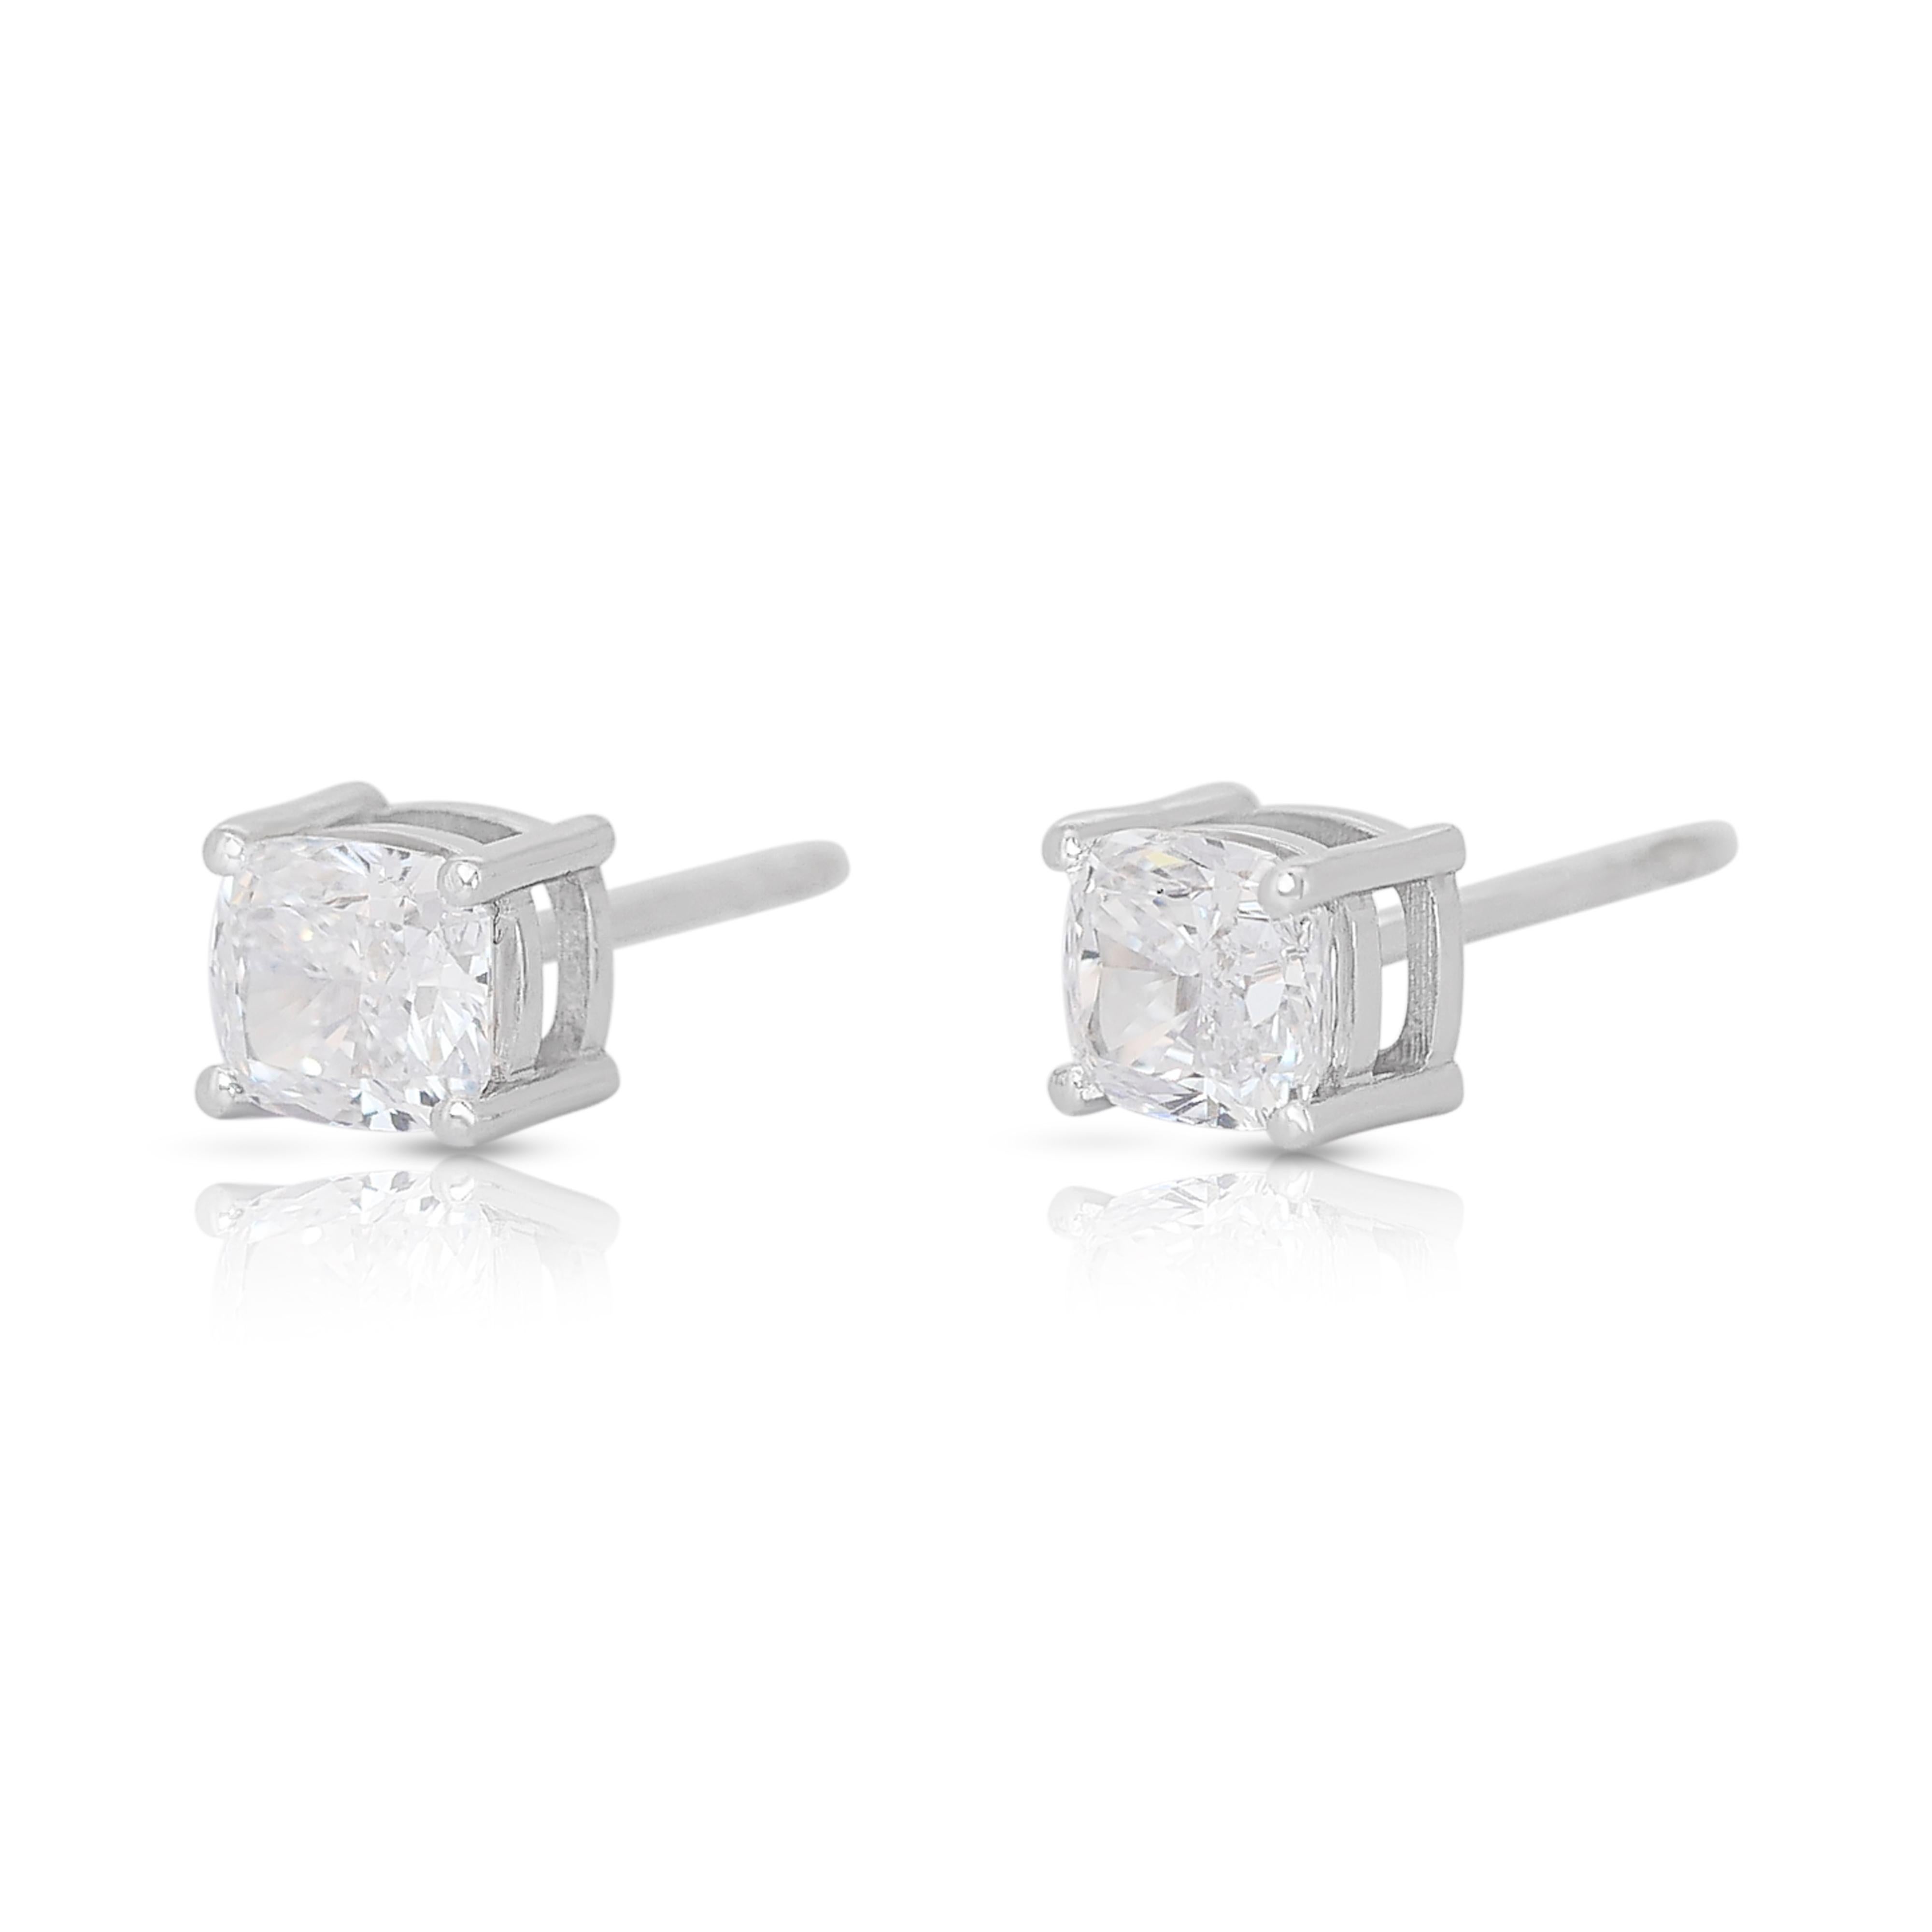 Lustrous 1.60ct Diamonds Stud Earrings in 18k White Gold - GIA Certified

Indulge in the pinnacle of luxury with these breathtaking diamond earrings, crafted in lustrous 18k white gold. Each earring features a stunning cushion-cut diamond weighing